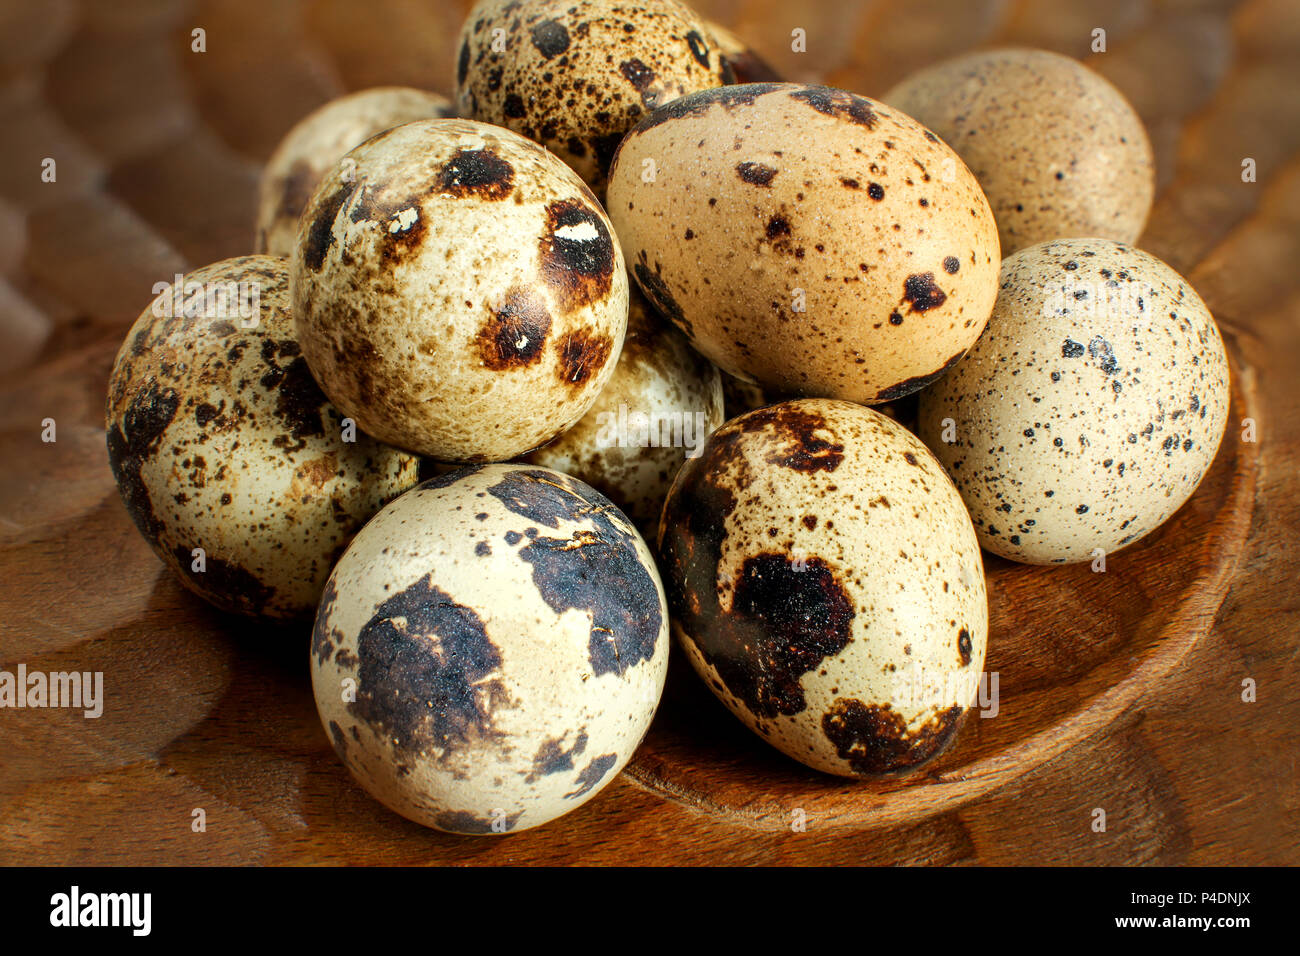 Detail view on quail eggs placed on wooden plate. Stock Photo